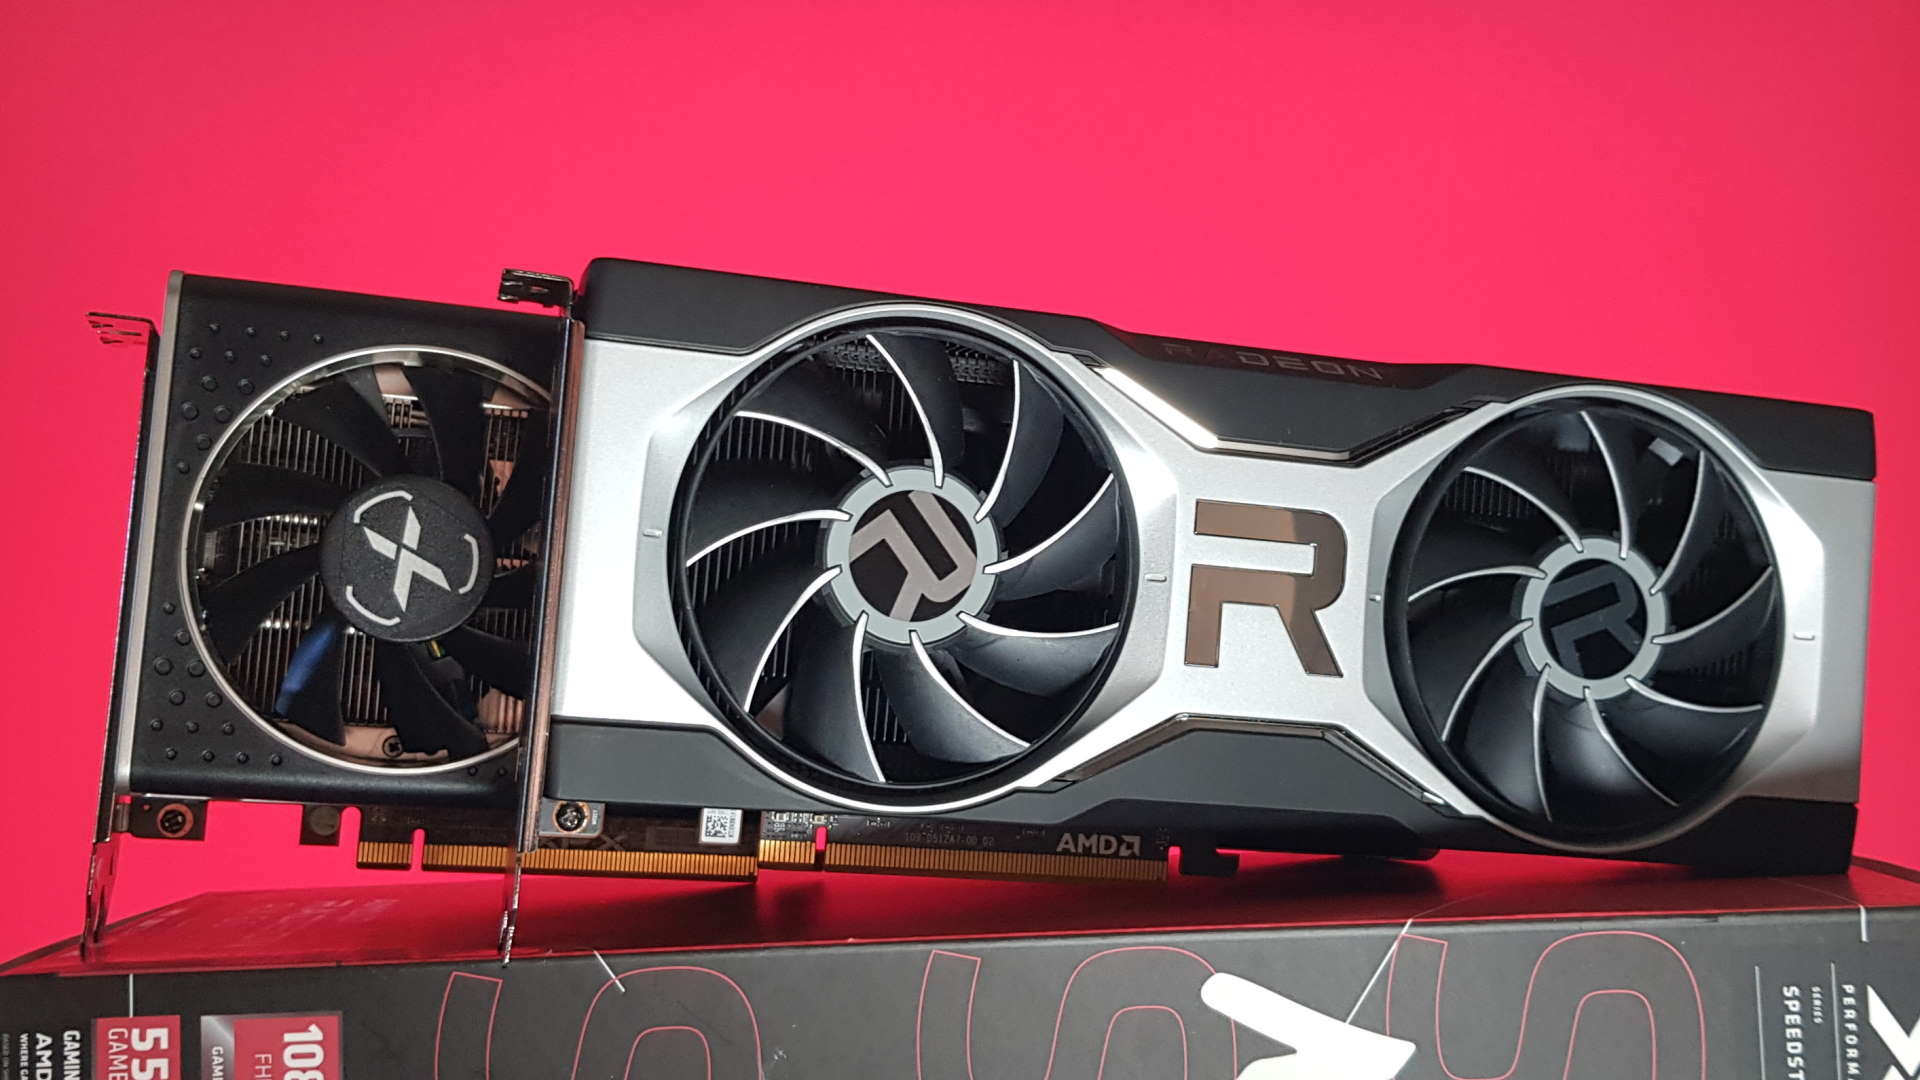  Your RDNA GPU just got the power to upscale nearly any game with Radeon Super Resolution 